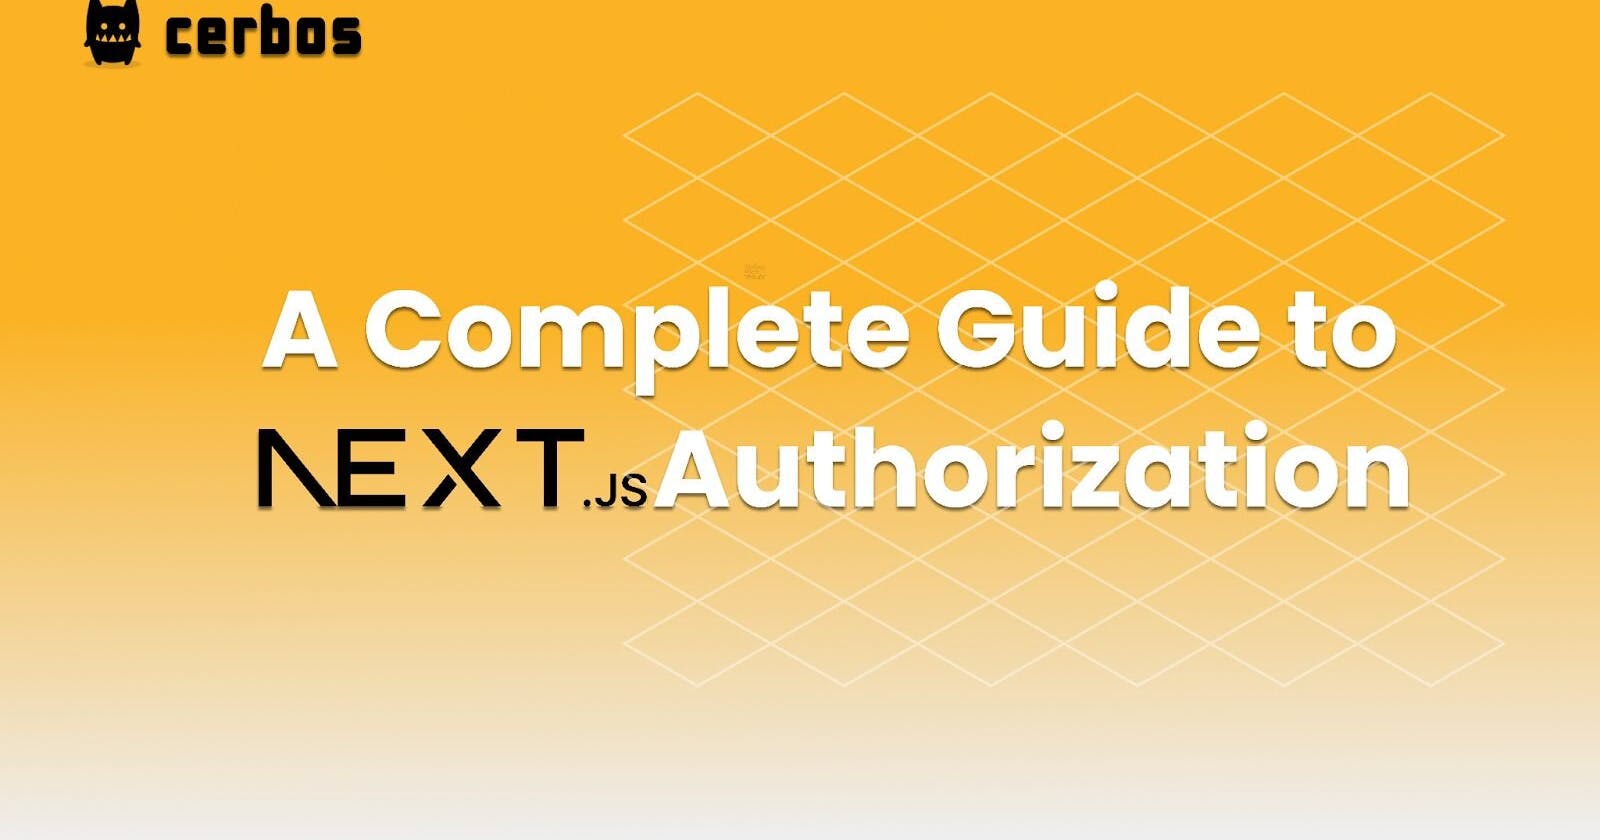 A Complete Guide to Next.js Authorization